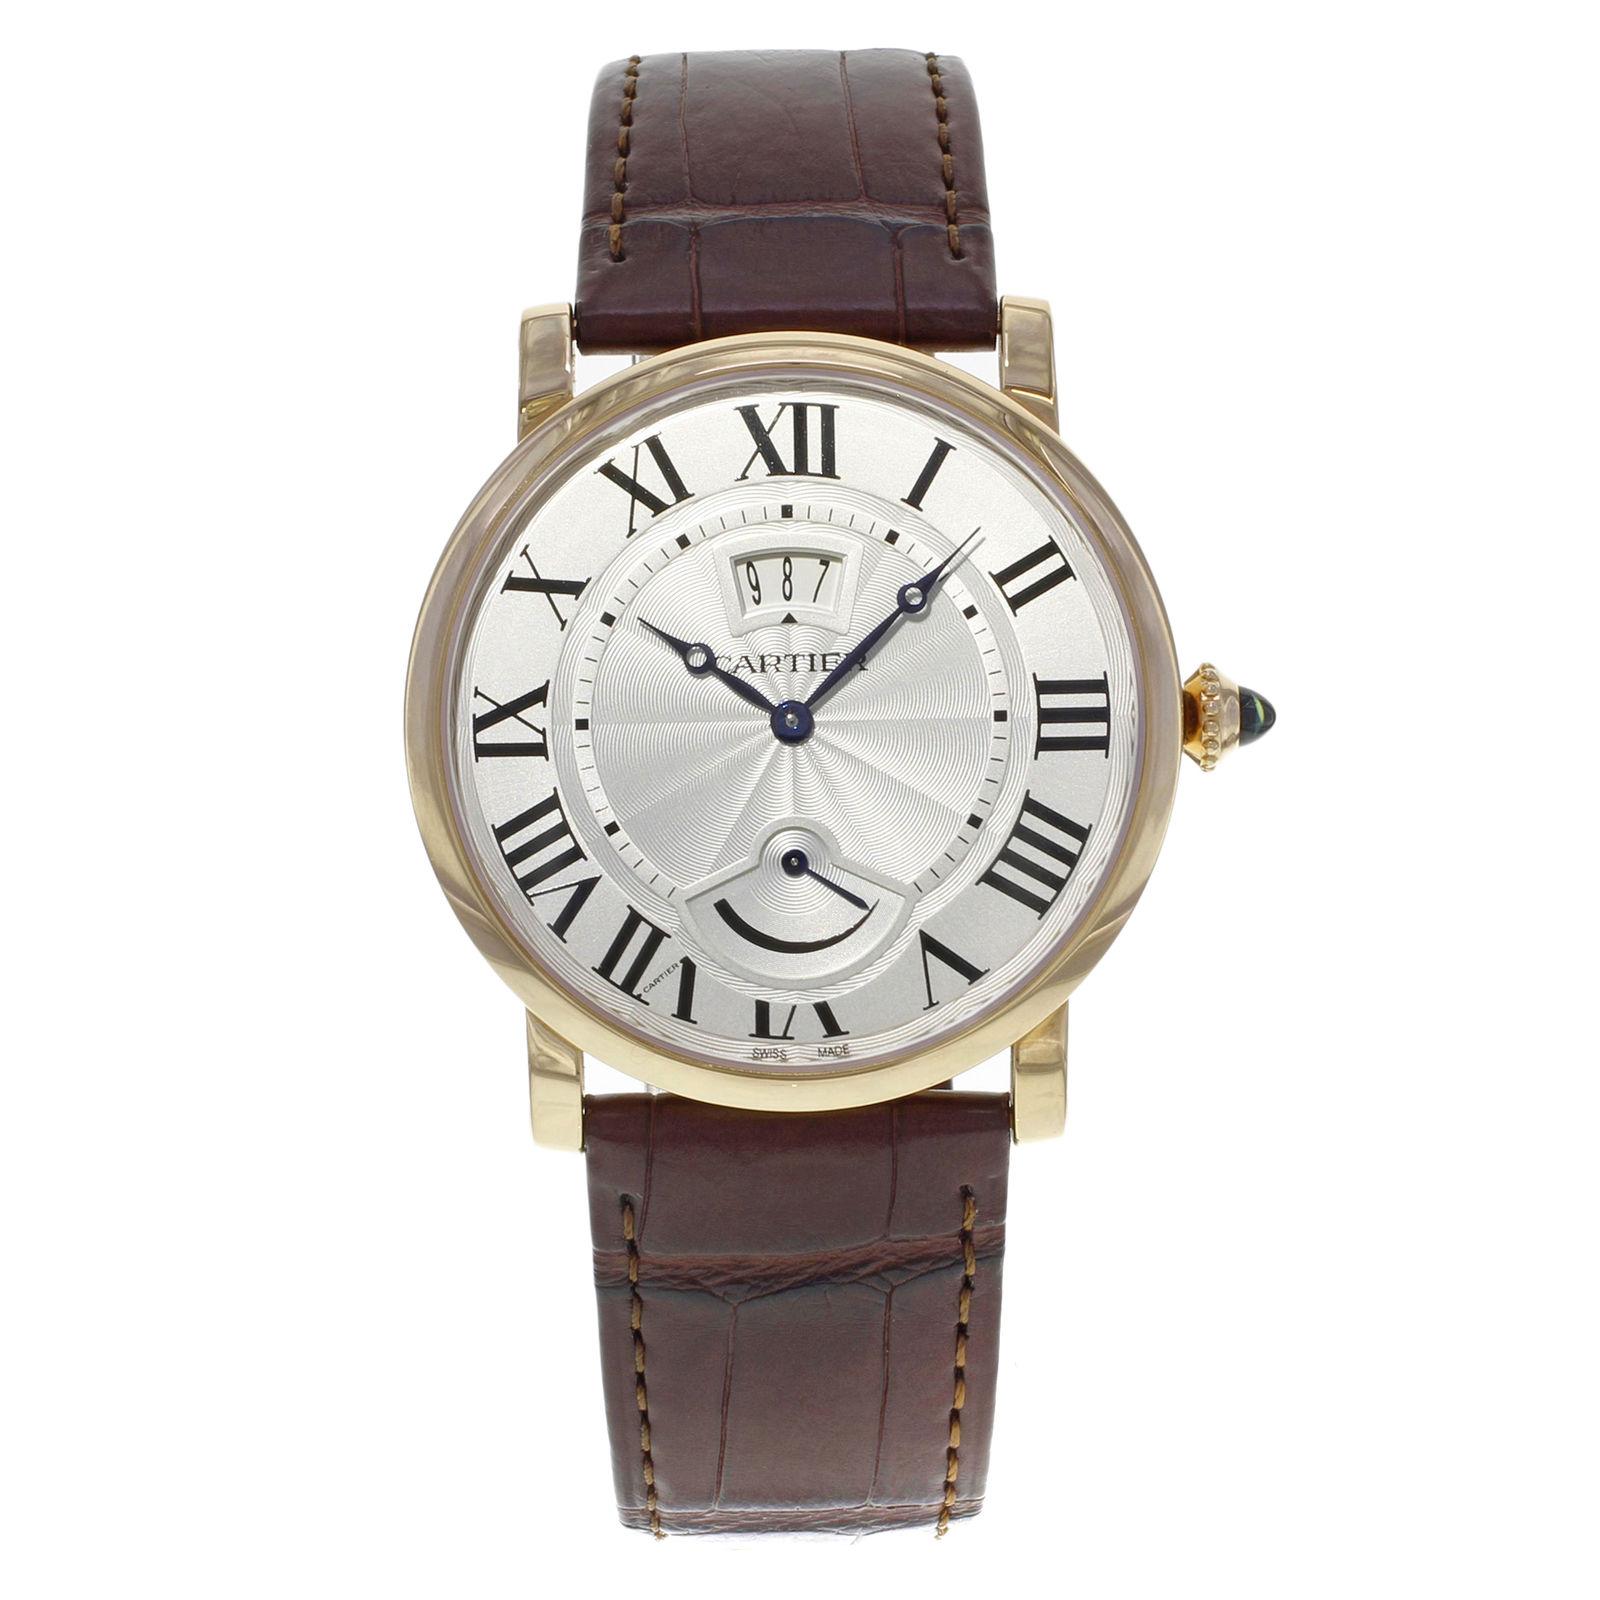 Cartier Rotonde Silver Dial 18K Rose Gold Hand Wind Mens Watch W1556252 New B/P